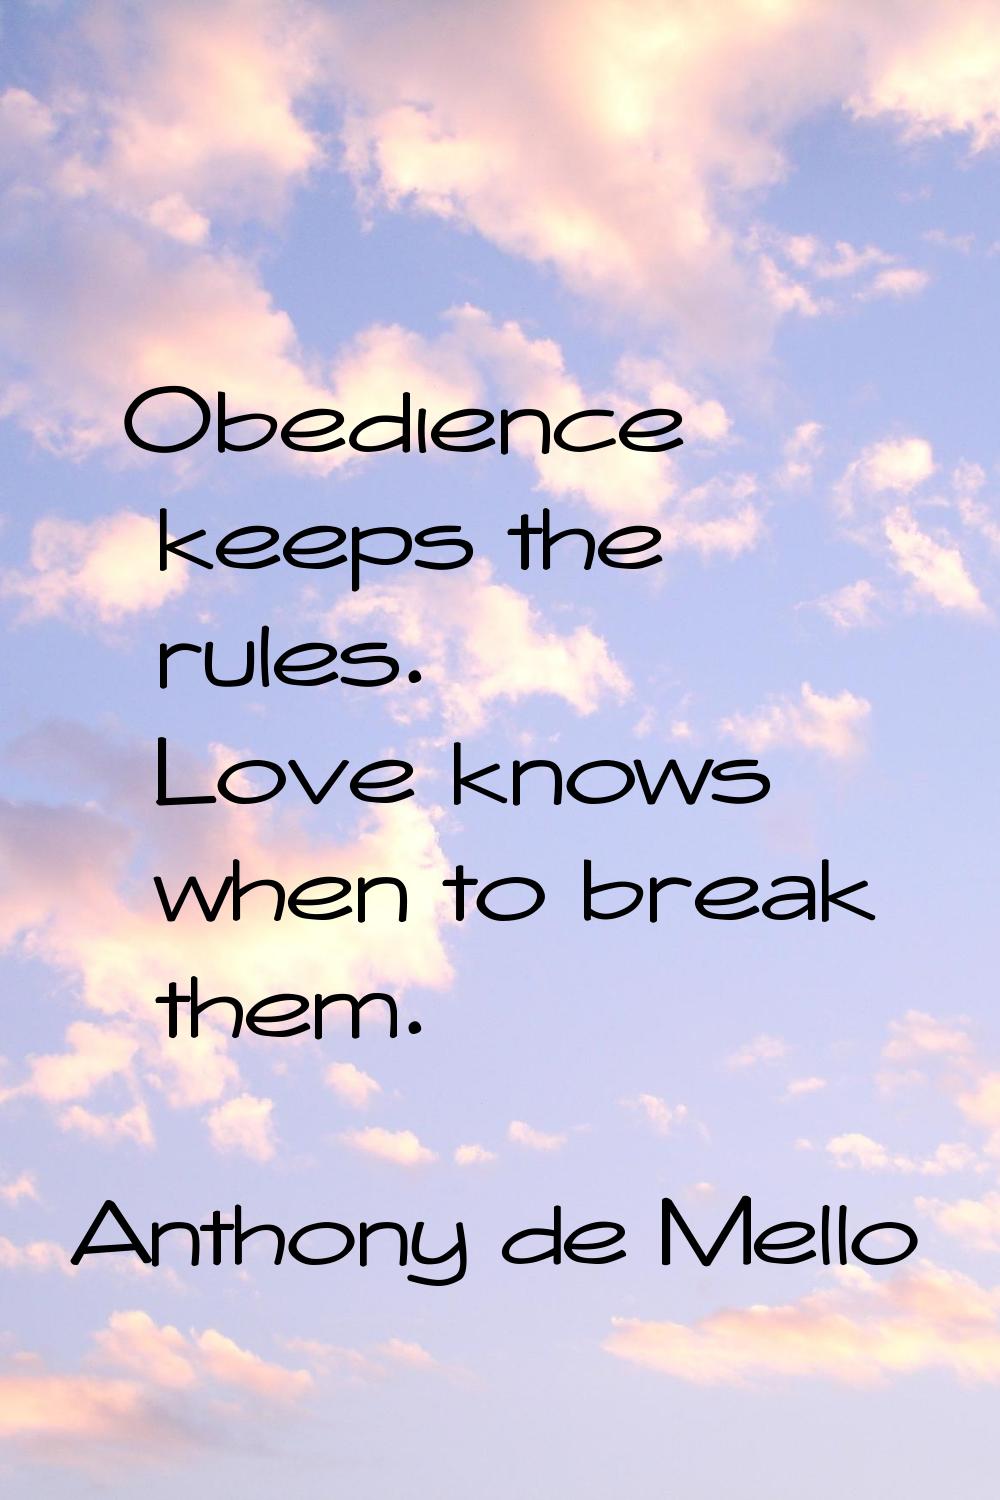 Obedience keeps the rules. Love knows when to break them.